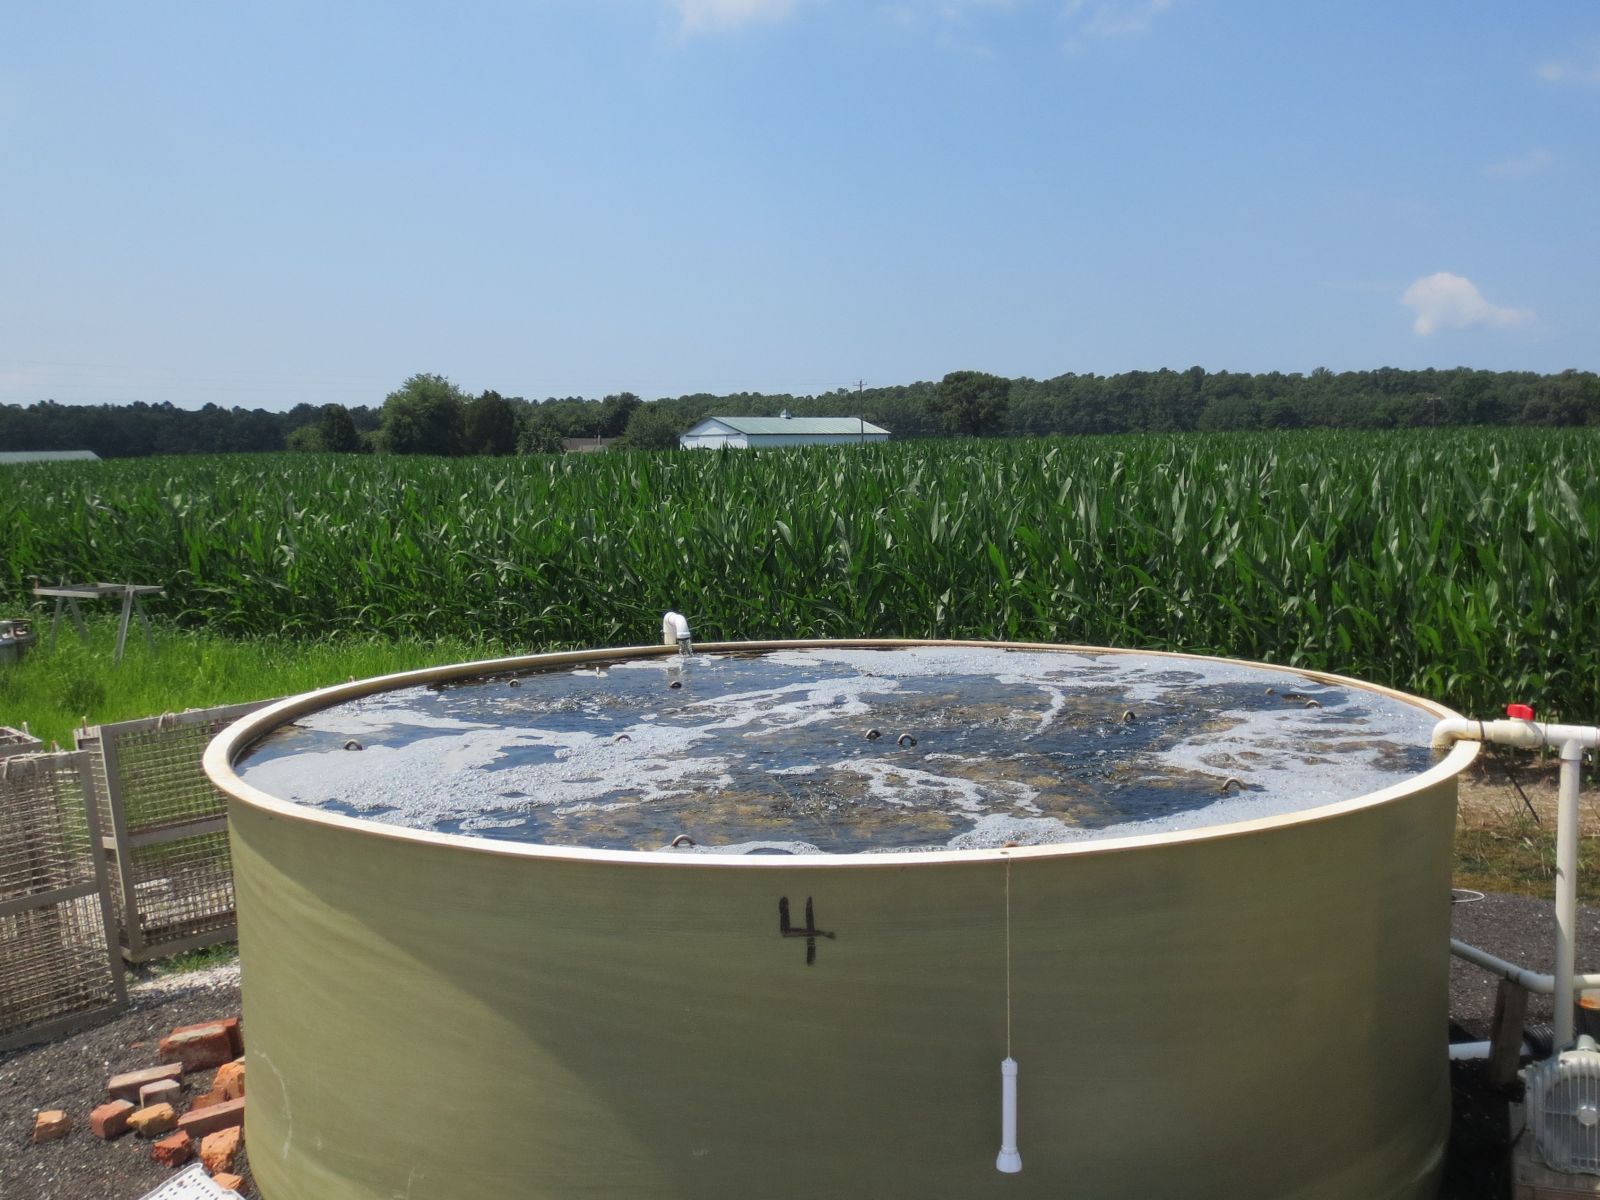 Oysters grow in a a tank in a cornfield.